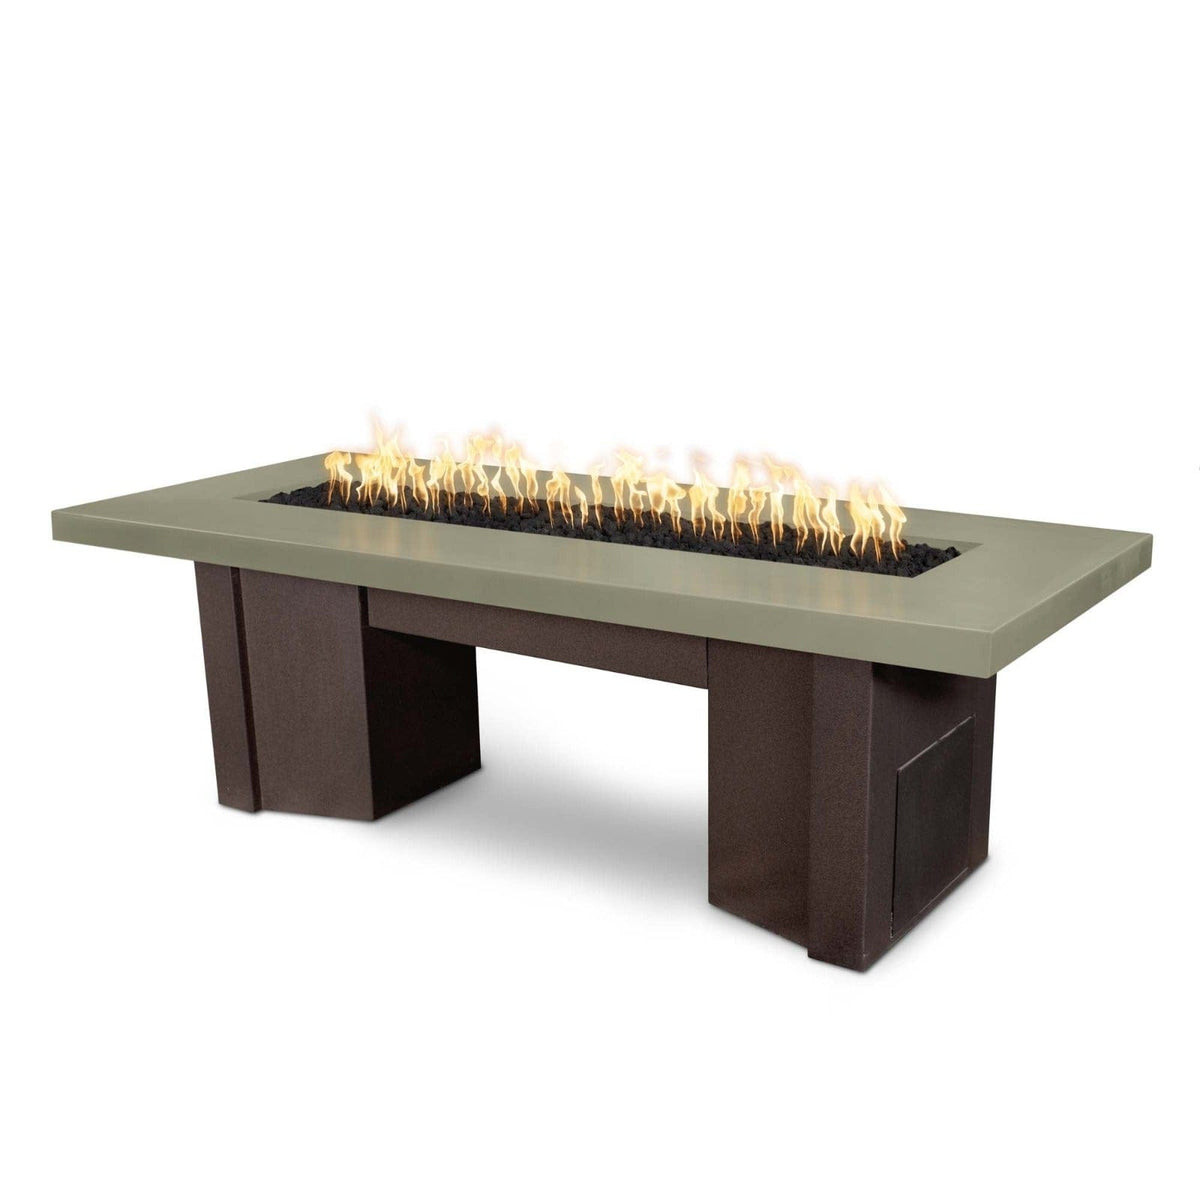 The Outdoor Plus Fire Features Ash (-ASH) / Java Powder Coated Steel (-JAV) The Outdoor Plus 60&quot; Alameda Fire Table Smooth Concrete in Liquid Propane - Flame Sense System with Push Button Spark Igniter / OPT-ALMGFRC60FSEN-LP